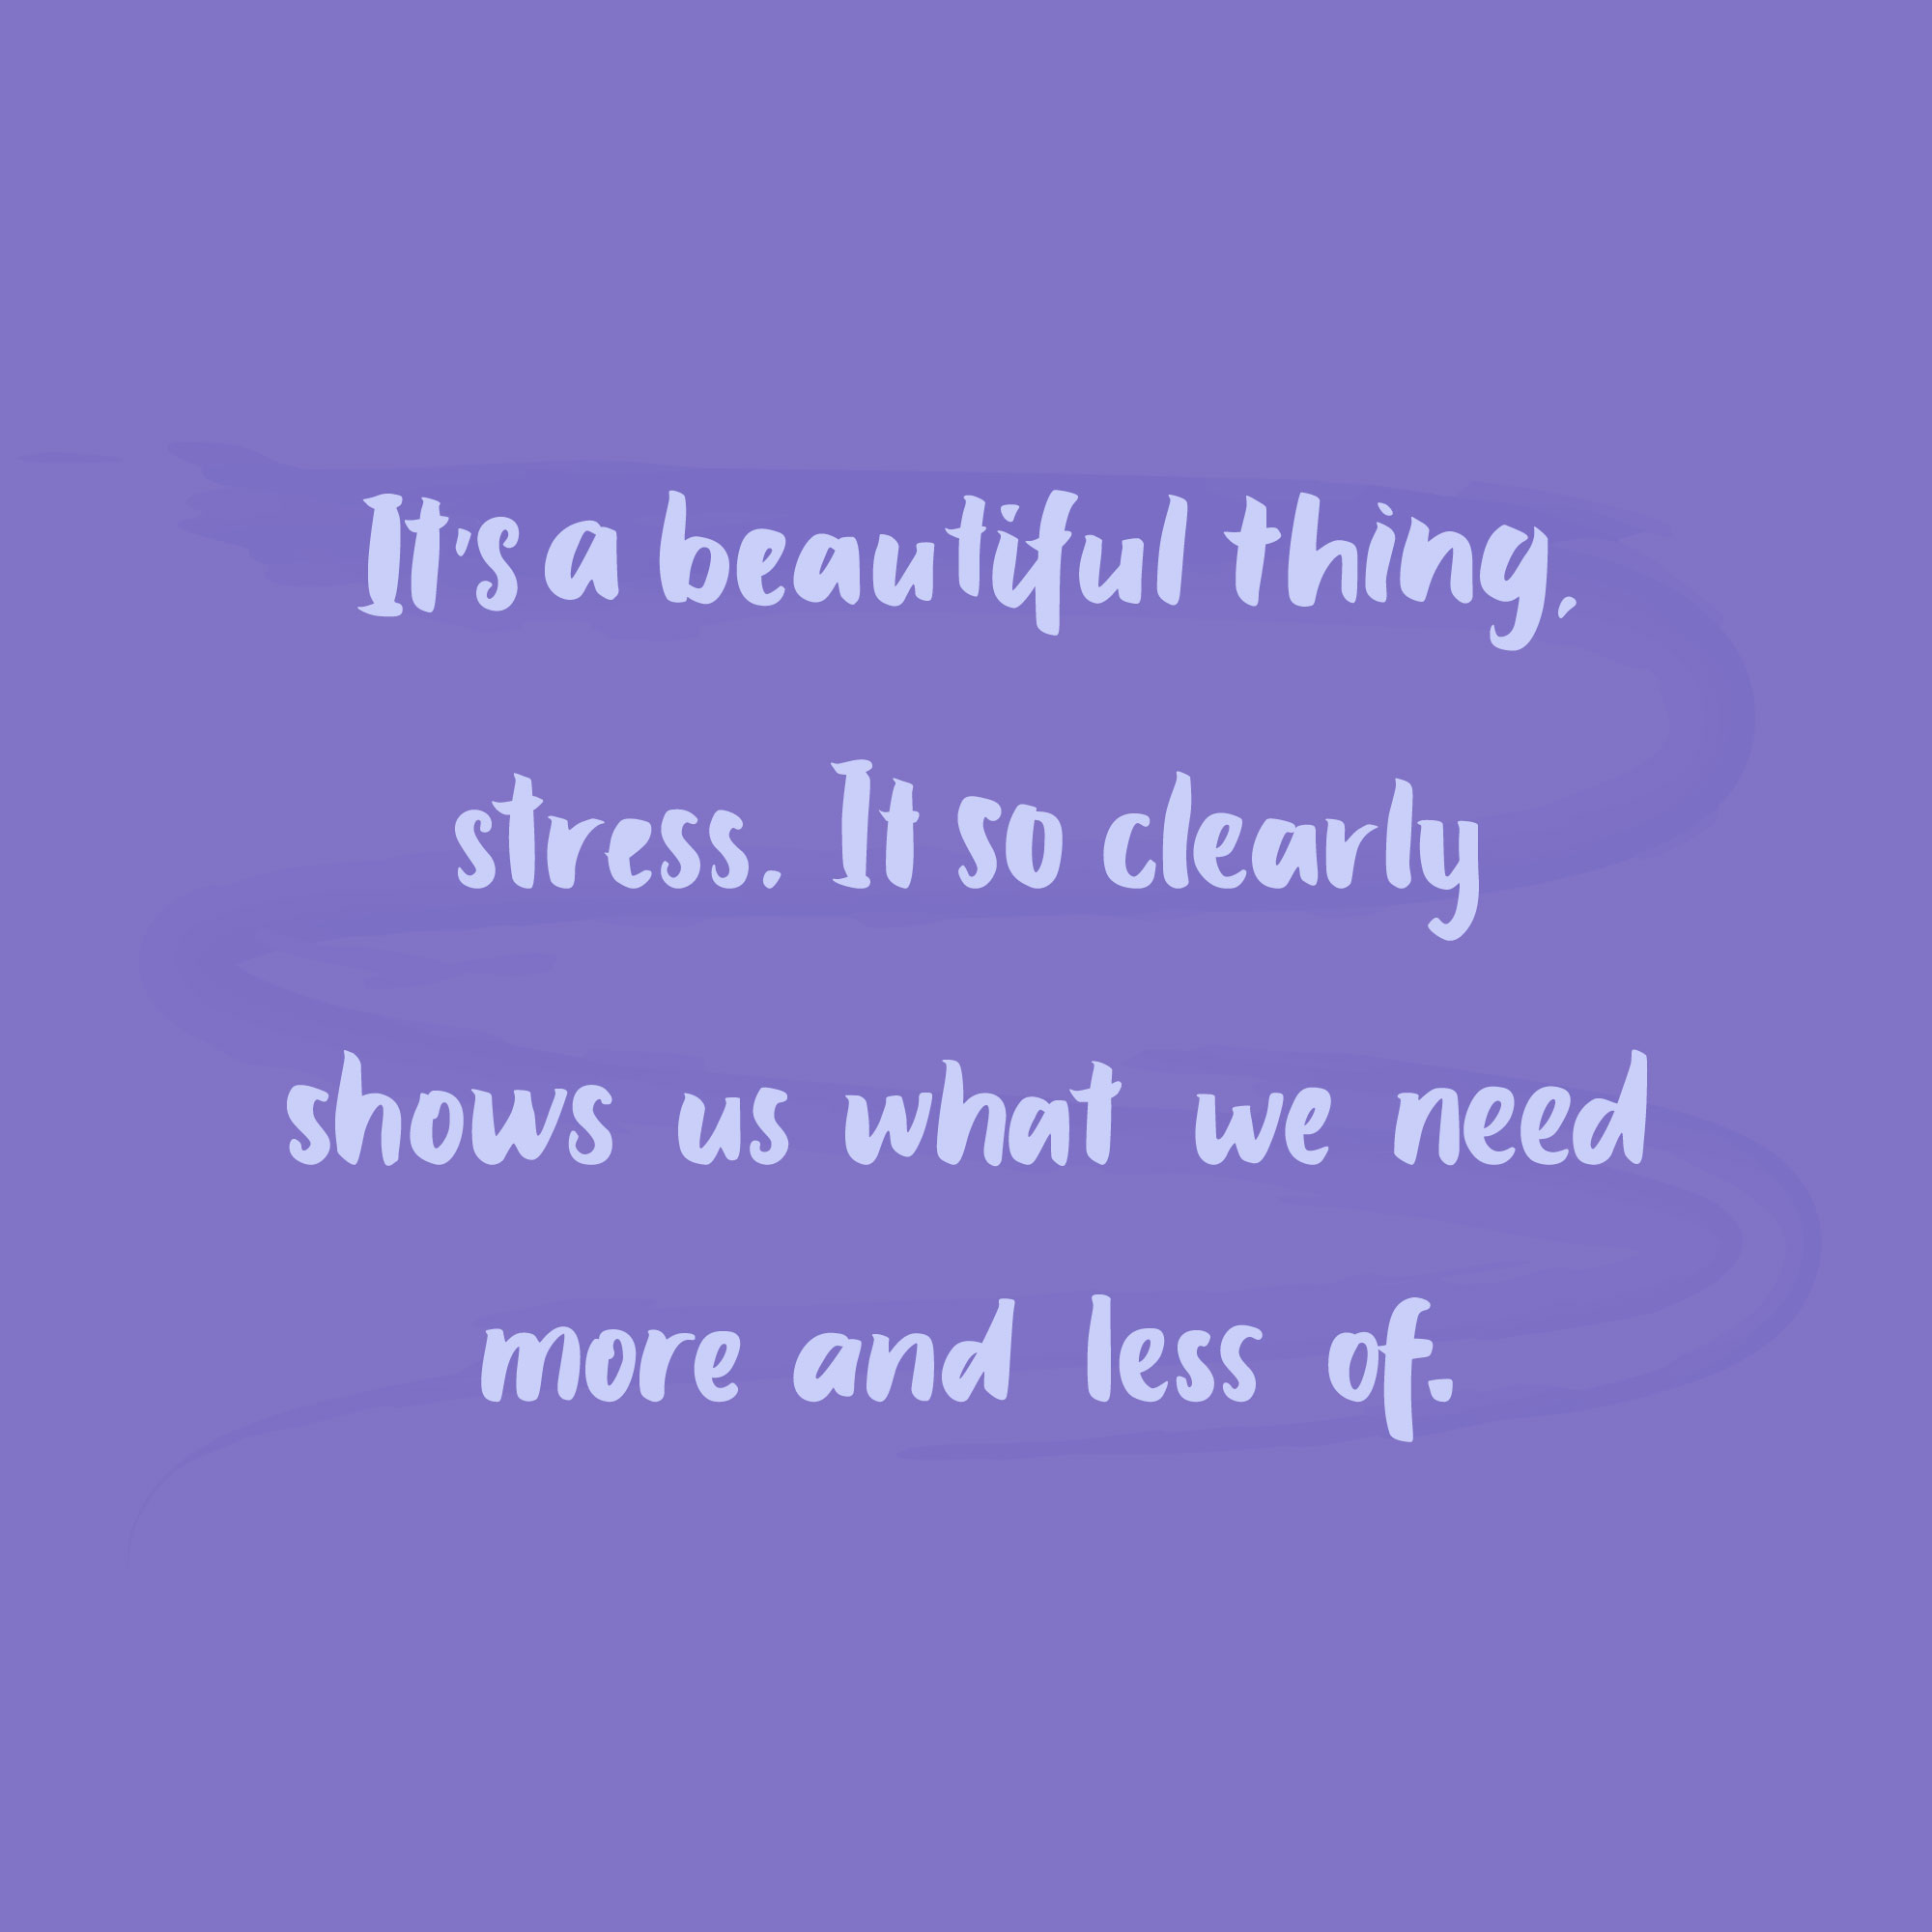 It's a beautiful thing stress. It so clearly shows us what we need more and less of.